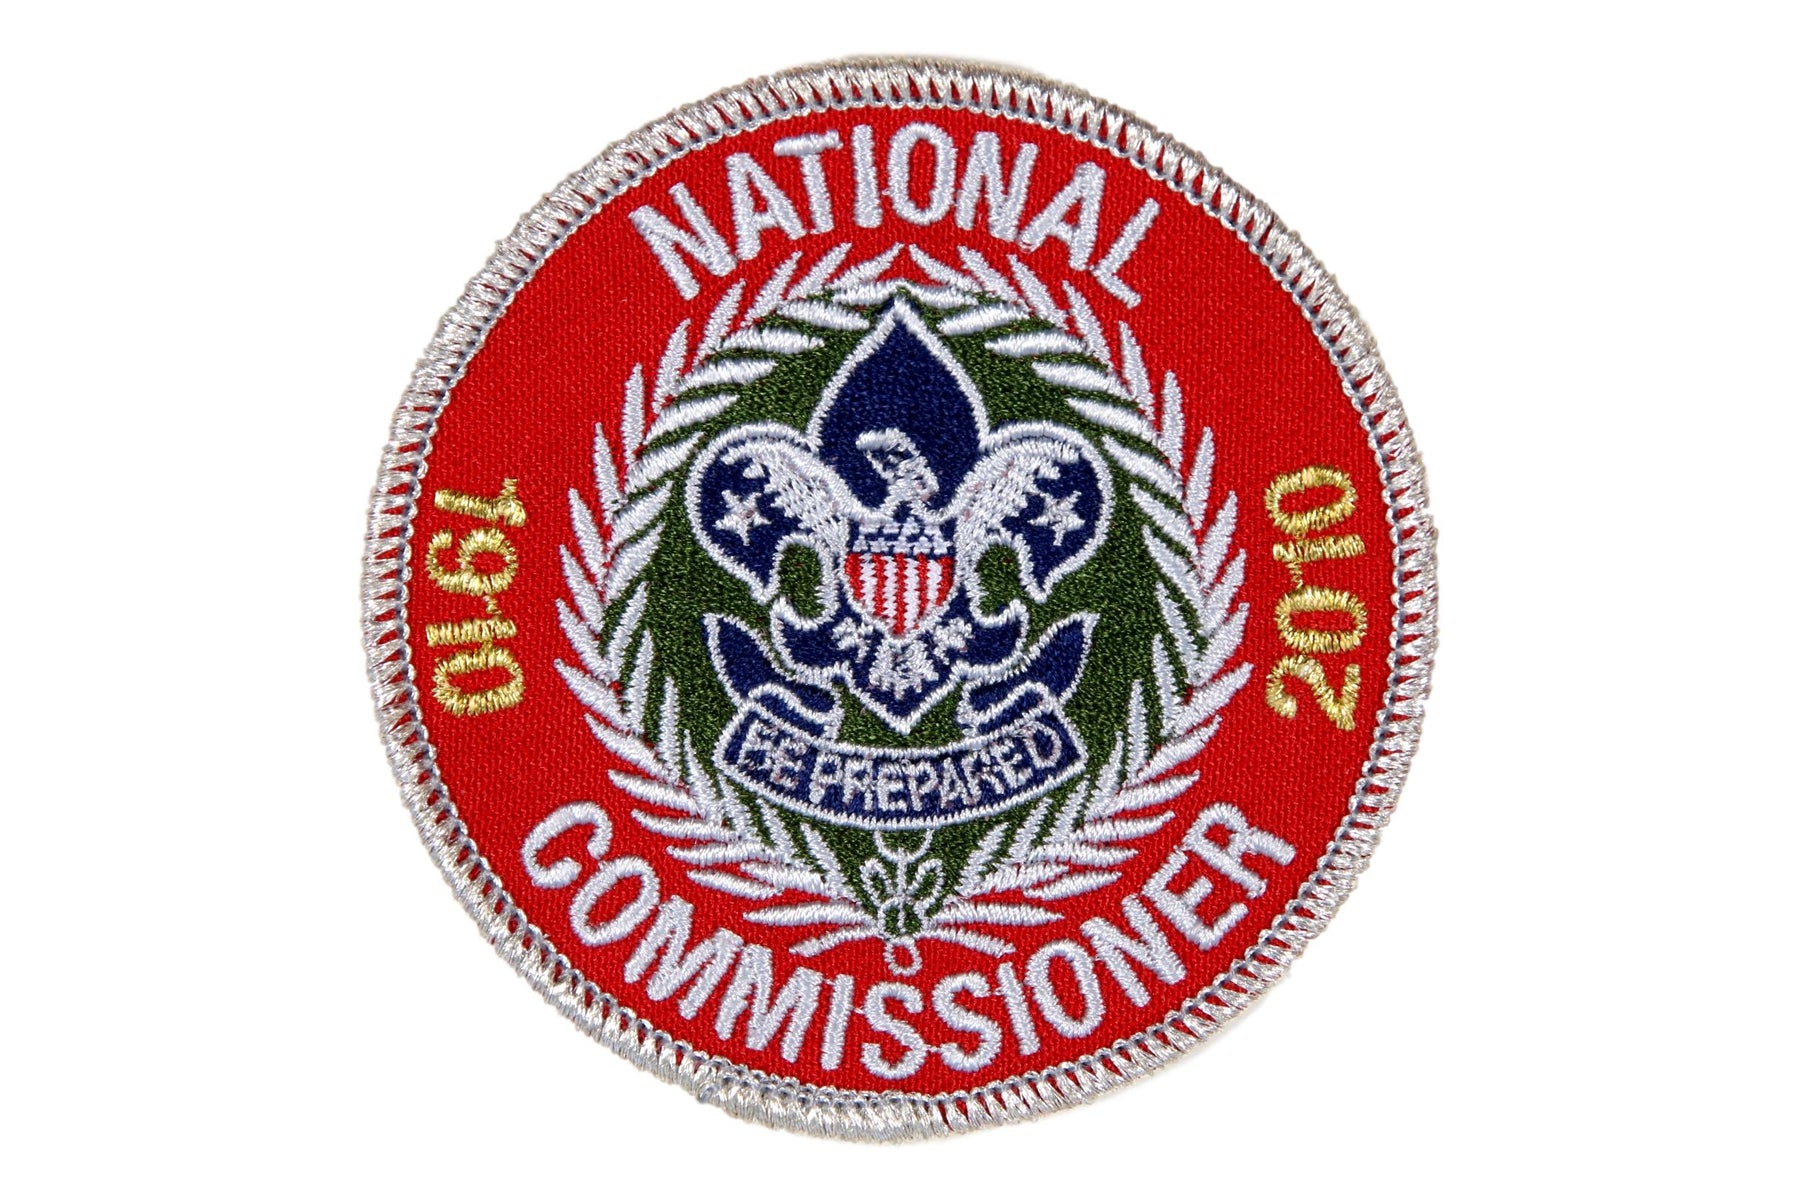 National Commissioner Patch 2010